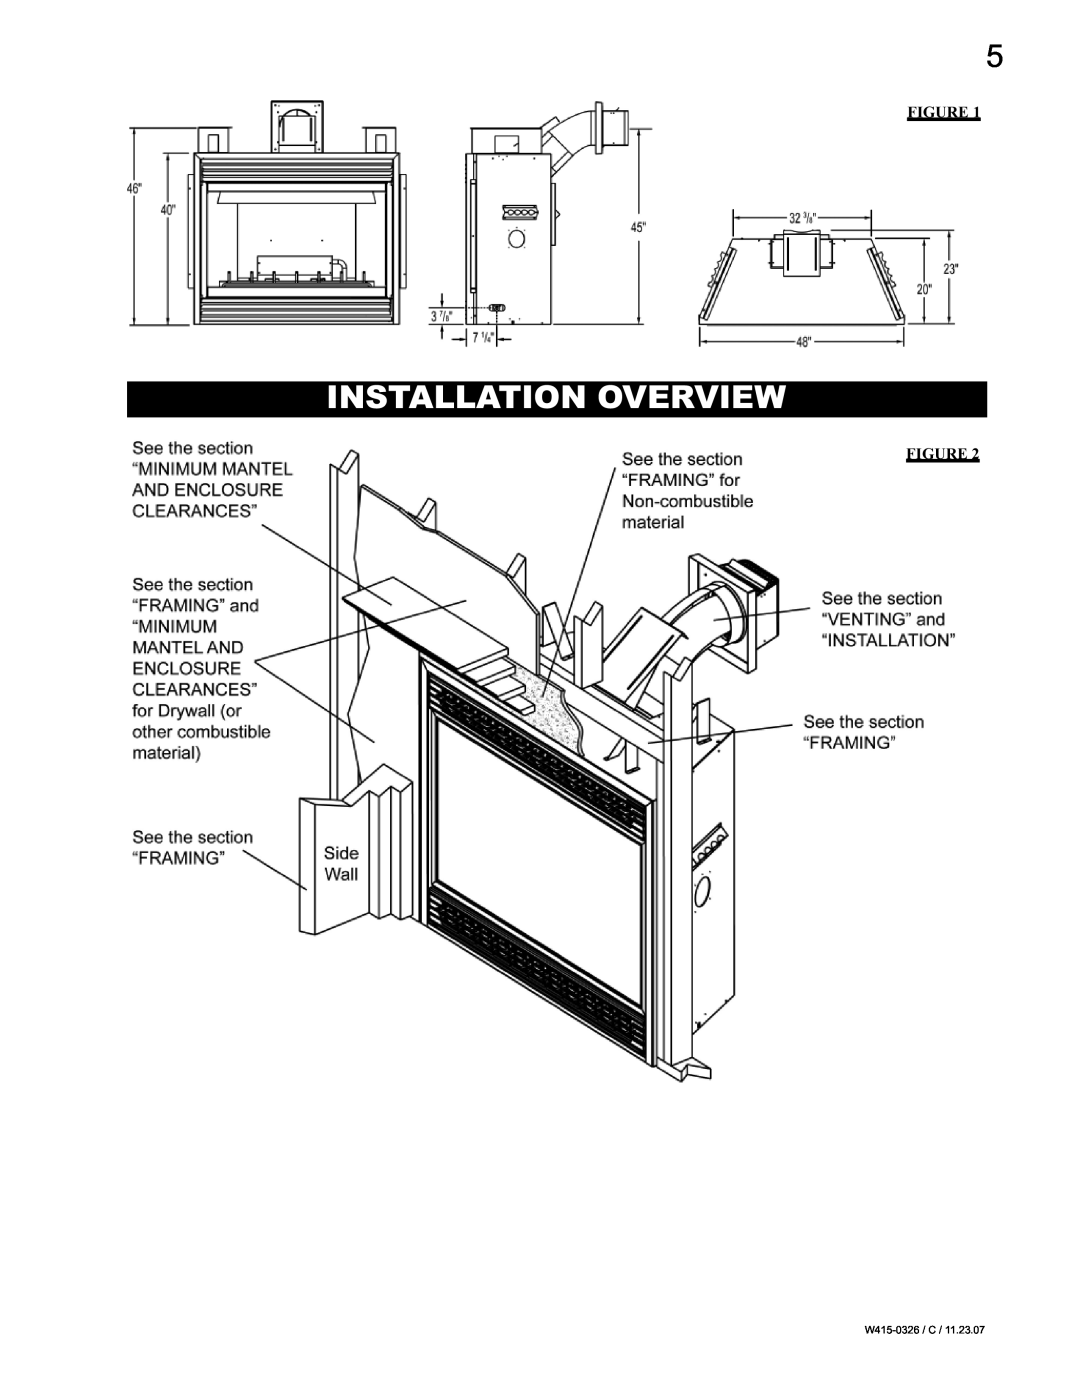 Napoleon Fireplaces BGD48P, BGD48N manual Installation Overview, W415-0326 /C 